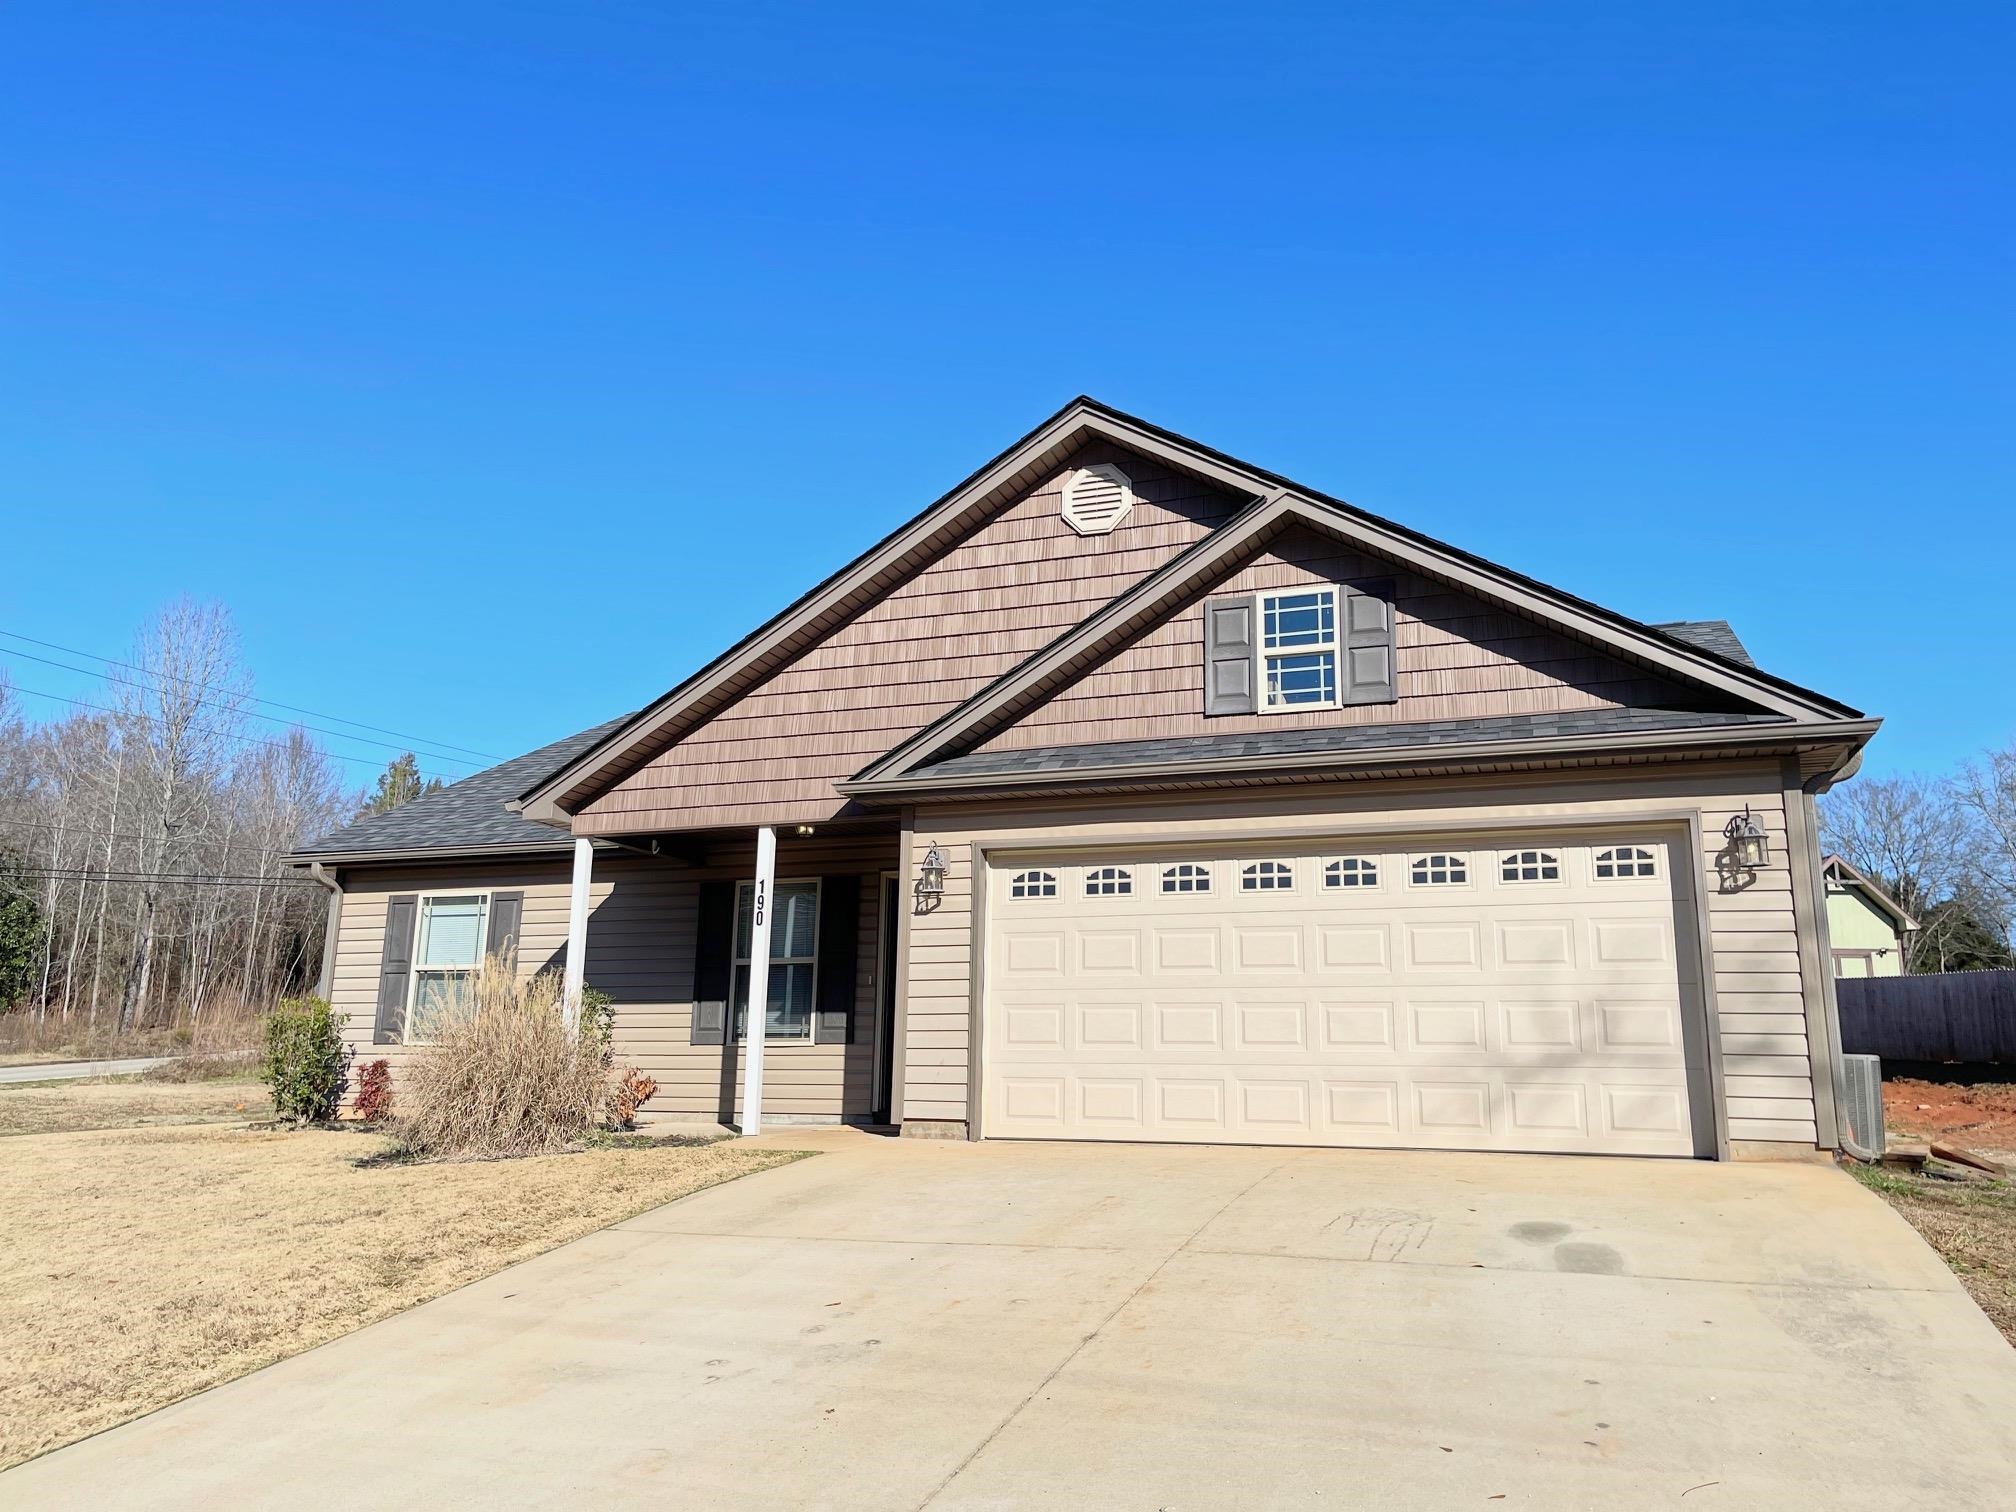 Built in 2017 by local builder and in great condition. New Flooring, including luxury vinyl plank! New paint. Refrigerator included. Large corner lot! Must See!